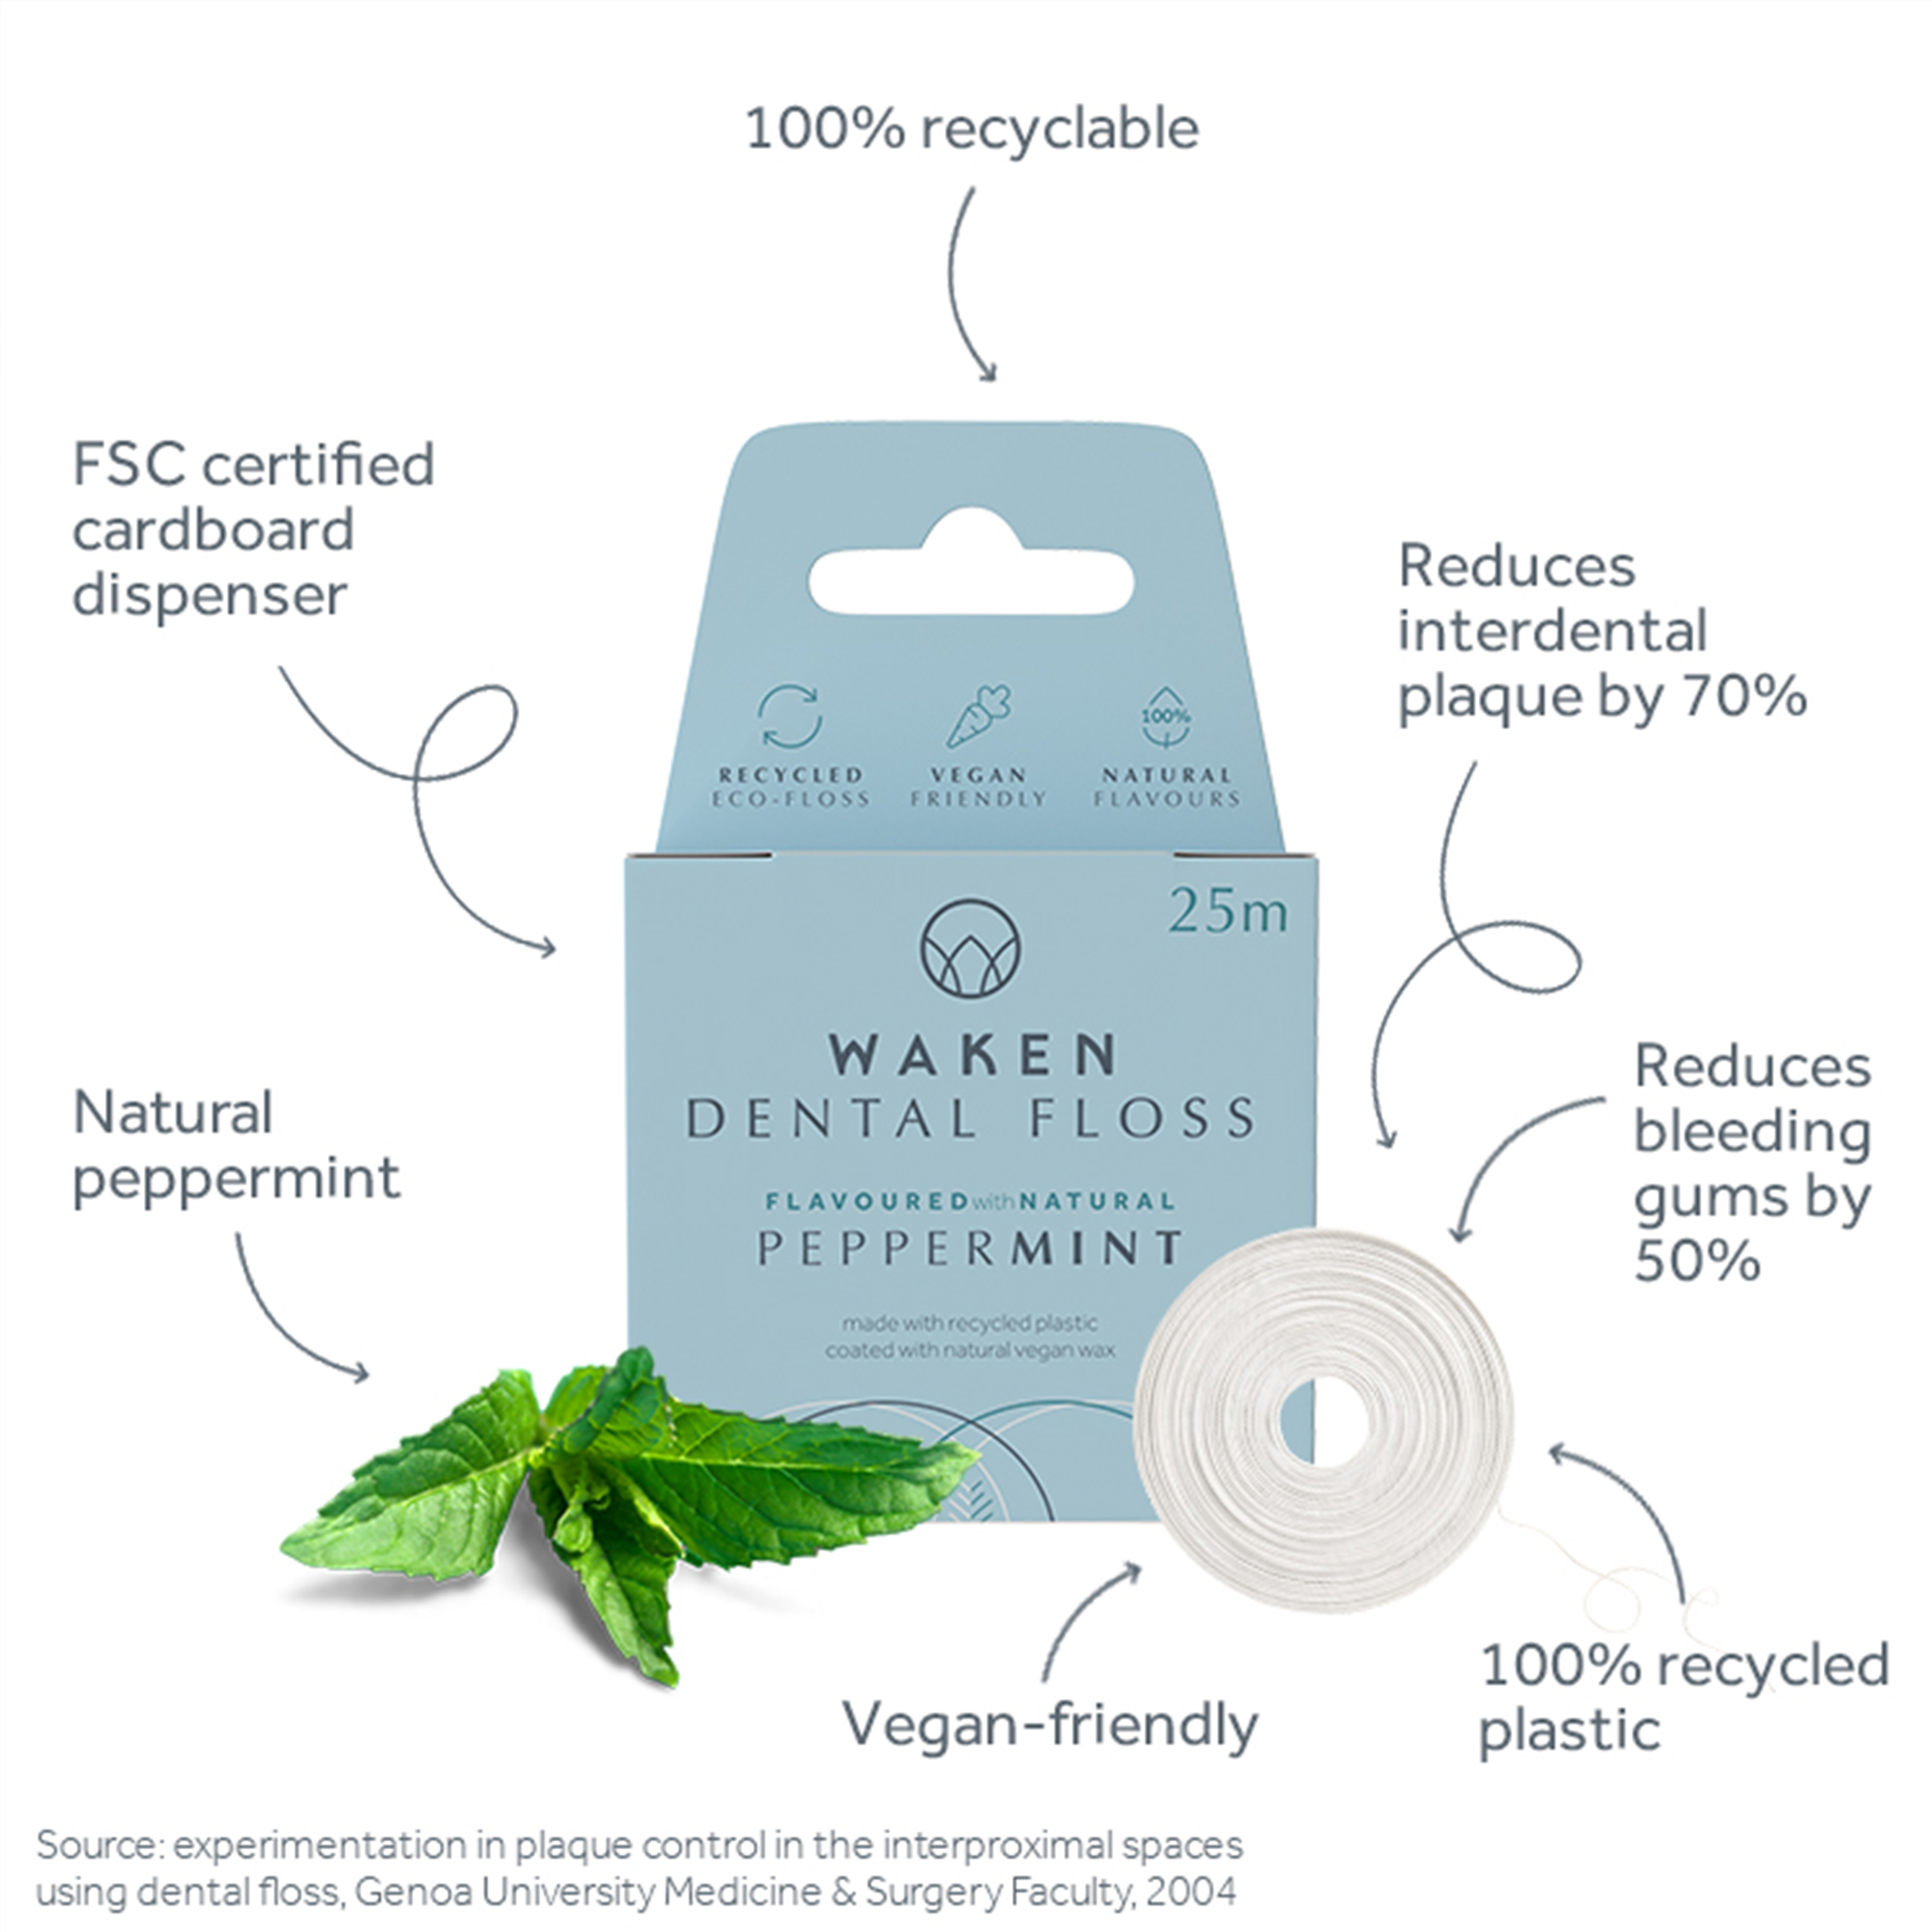 100% recyclable, FSC certified cardboard dispenser, natural peppermint, reduces interdental plaque by 70% reduces bleeding by gums by 50%, 100% recycled plastic, vegan friendly.